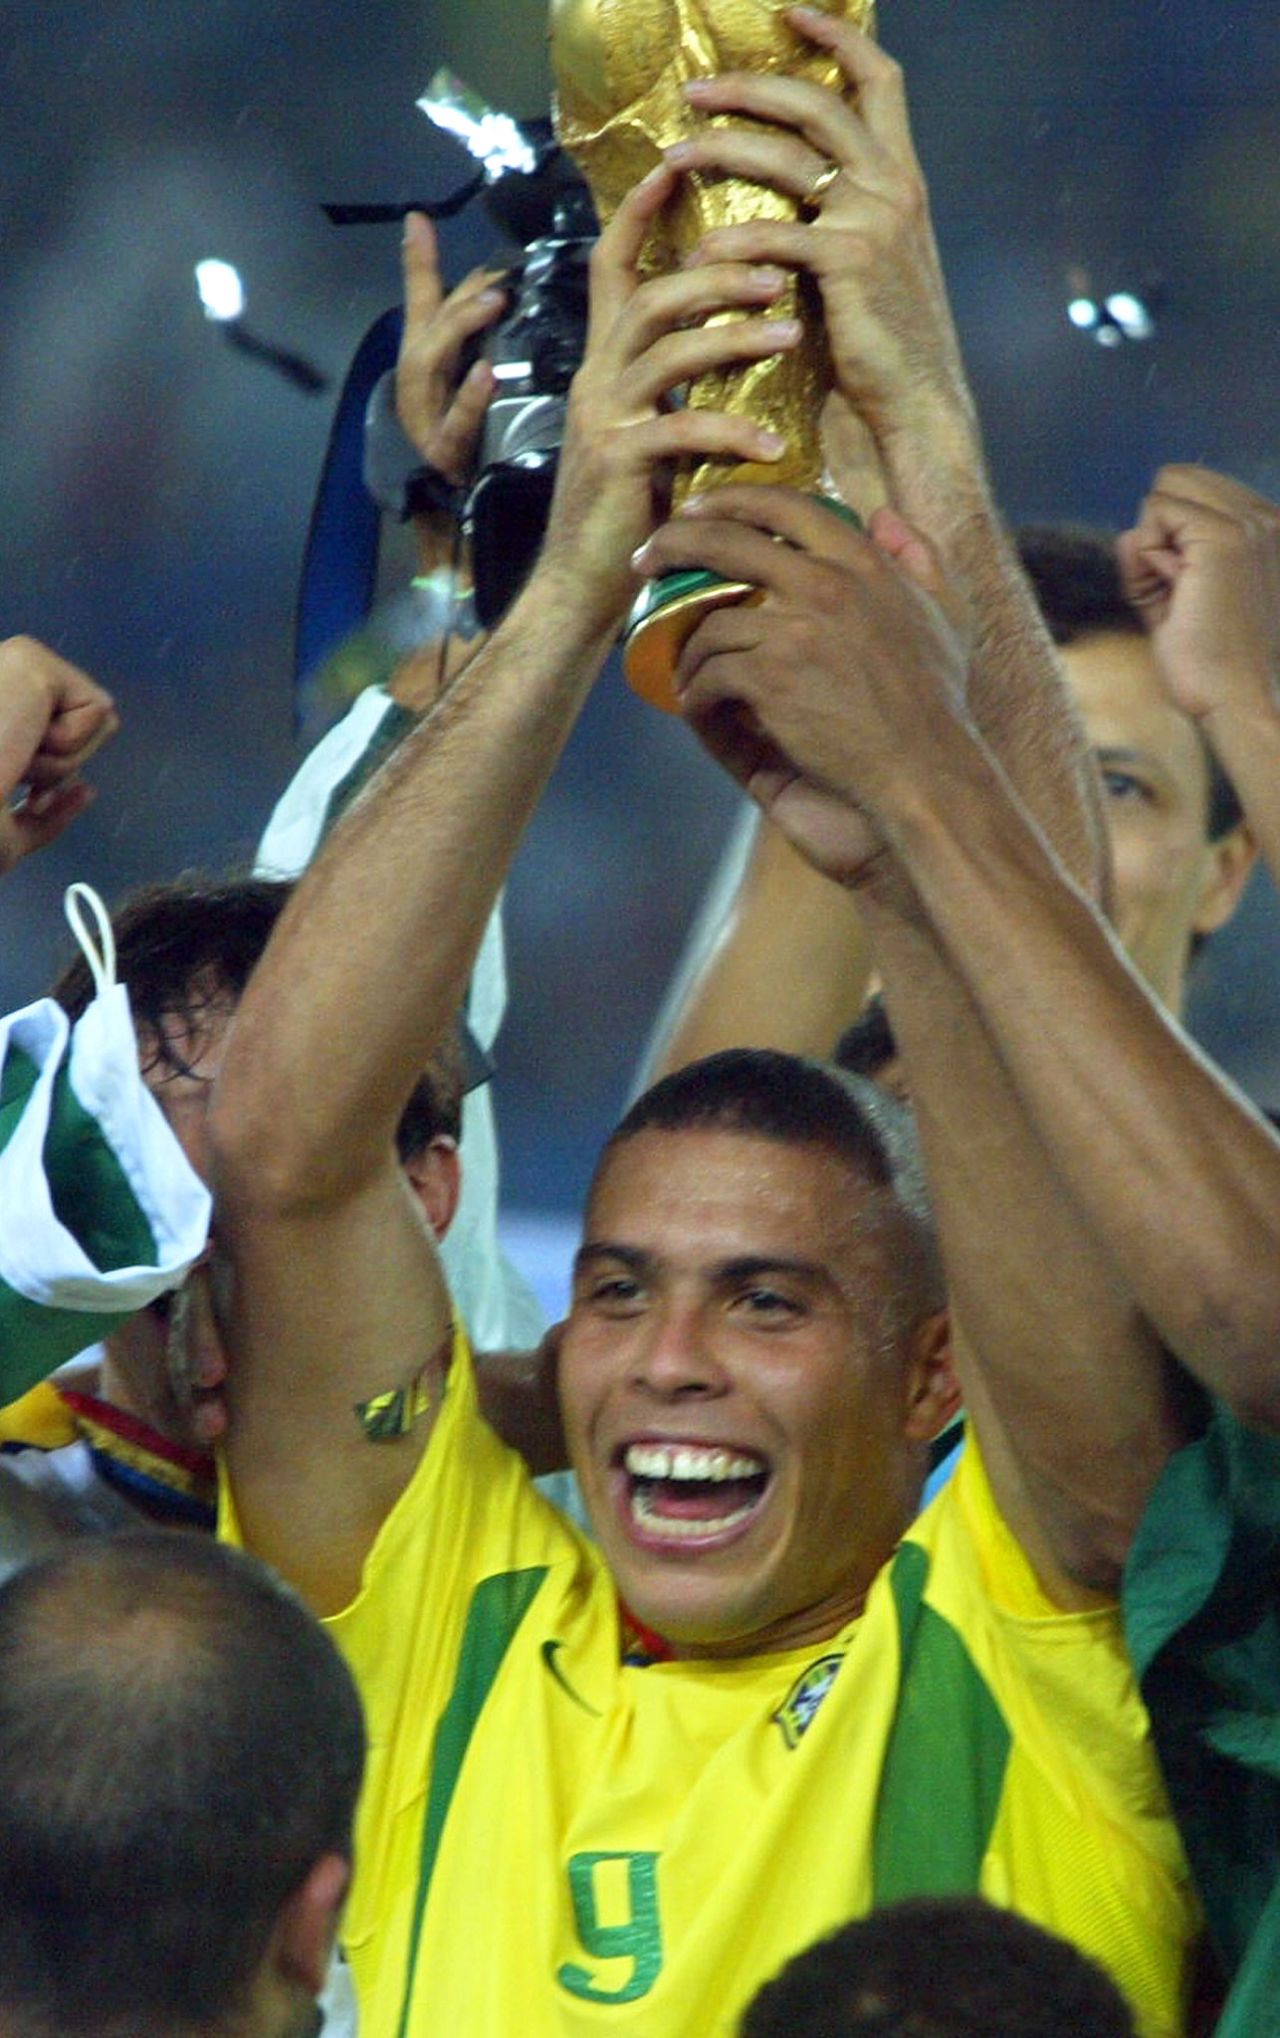 Scolari's Brazil beat Germany 2-0 in the final 11 years ago, with Ronaldo scoring a brace in the showpiece match.